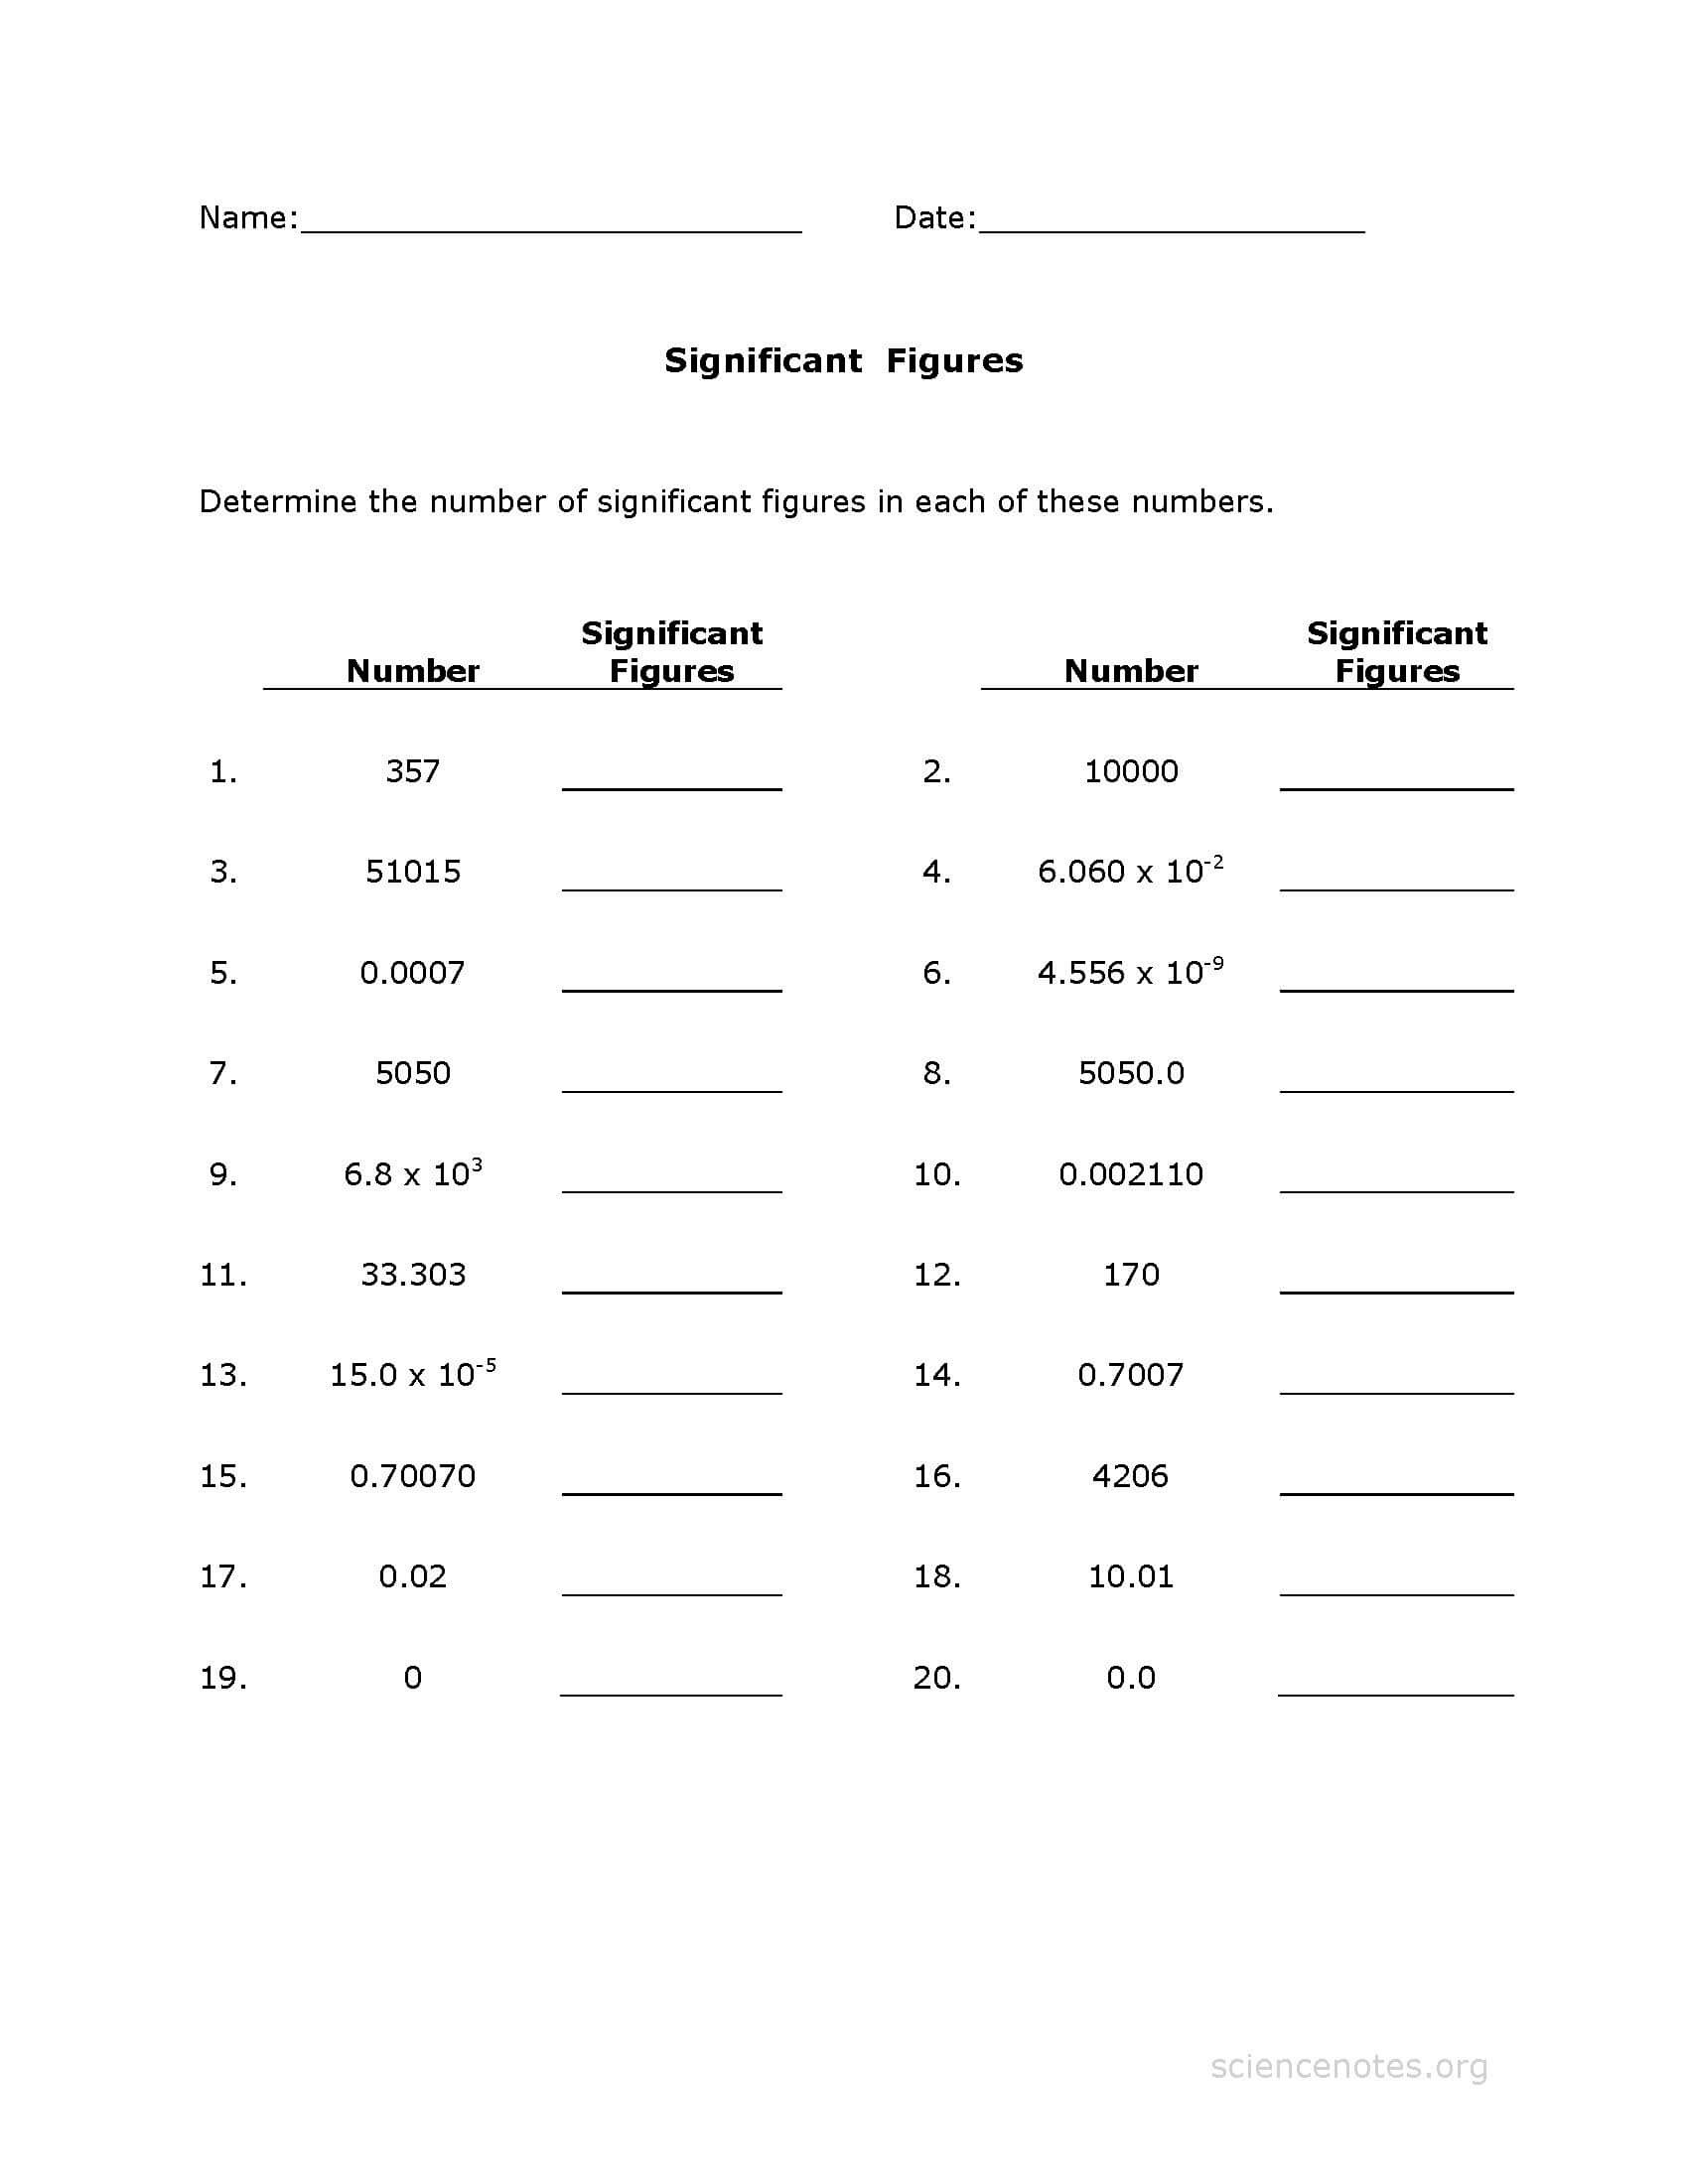 Significant Figures Worksheet Answers Significant Figures Worksheet